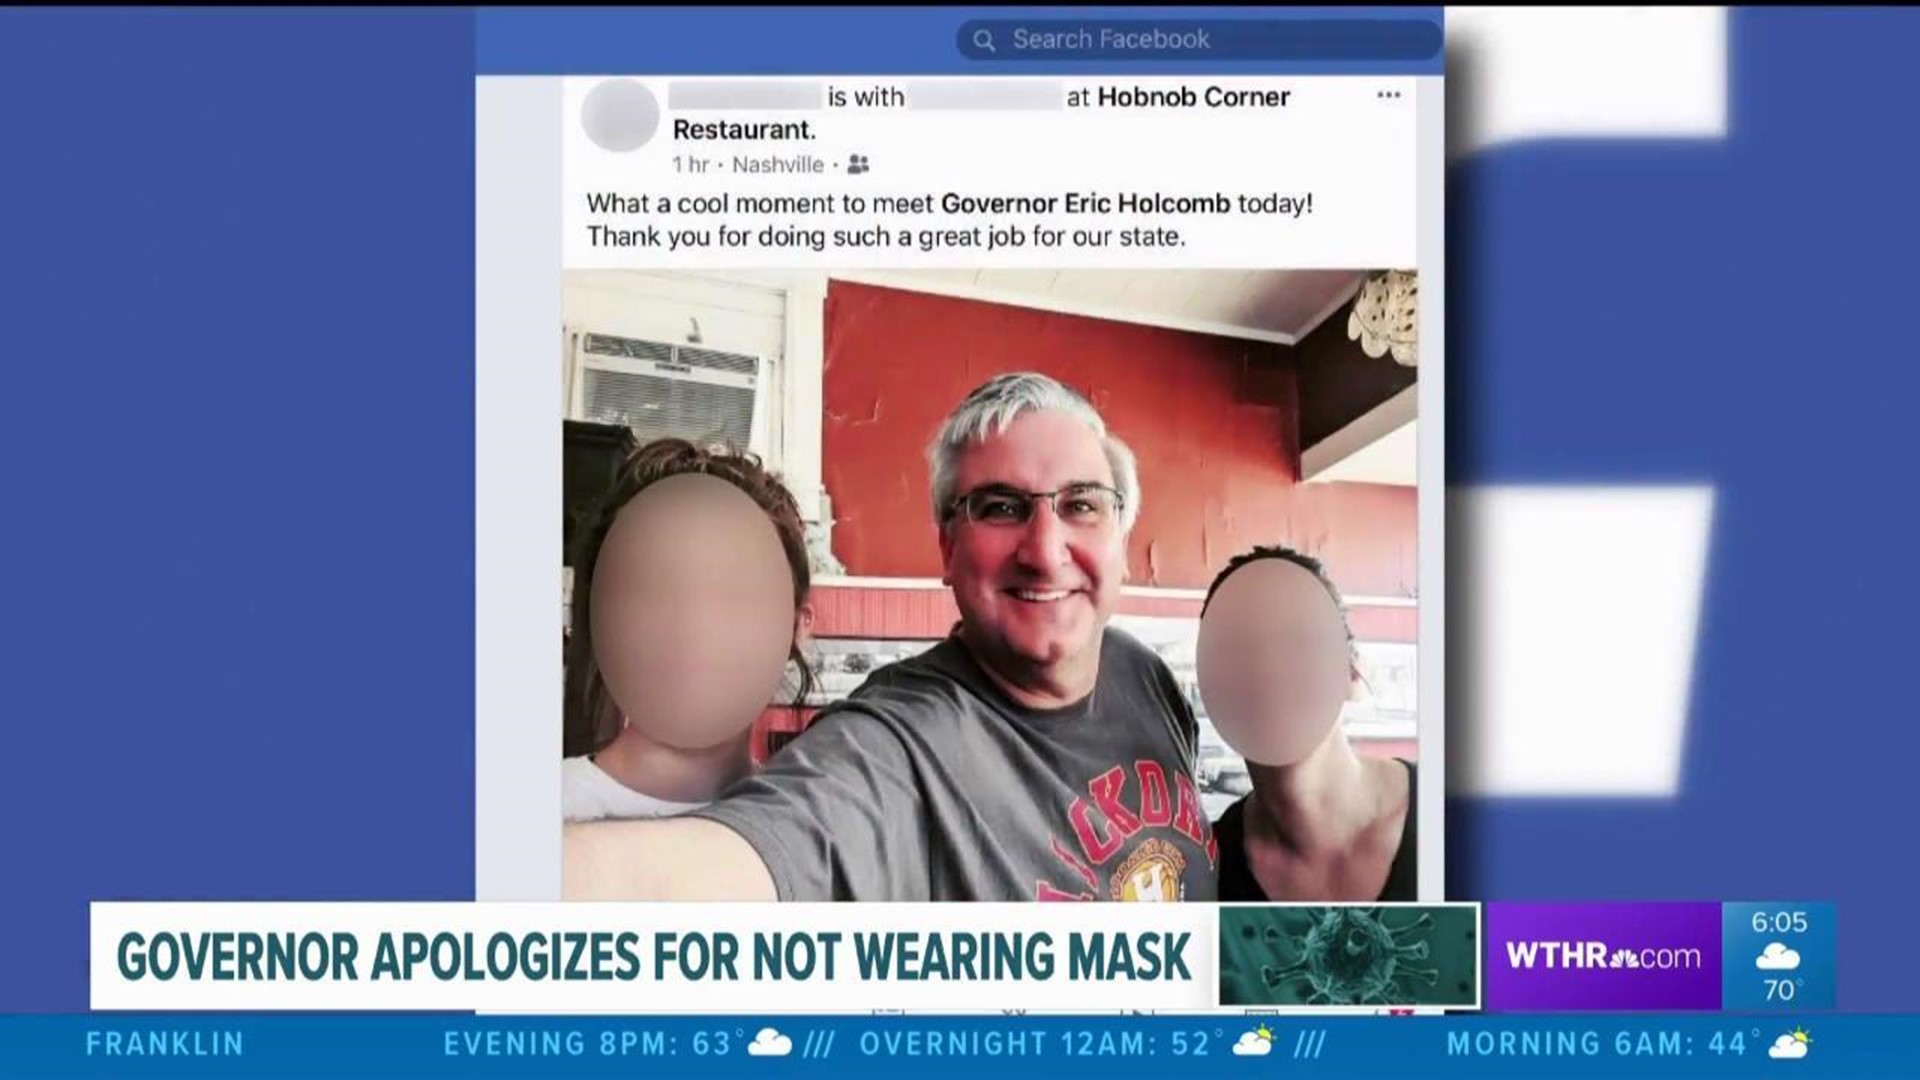 Governor apologizes for not wearing mask